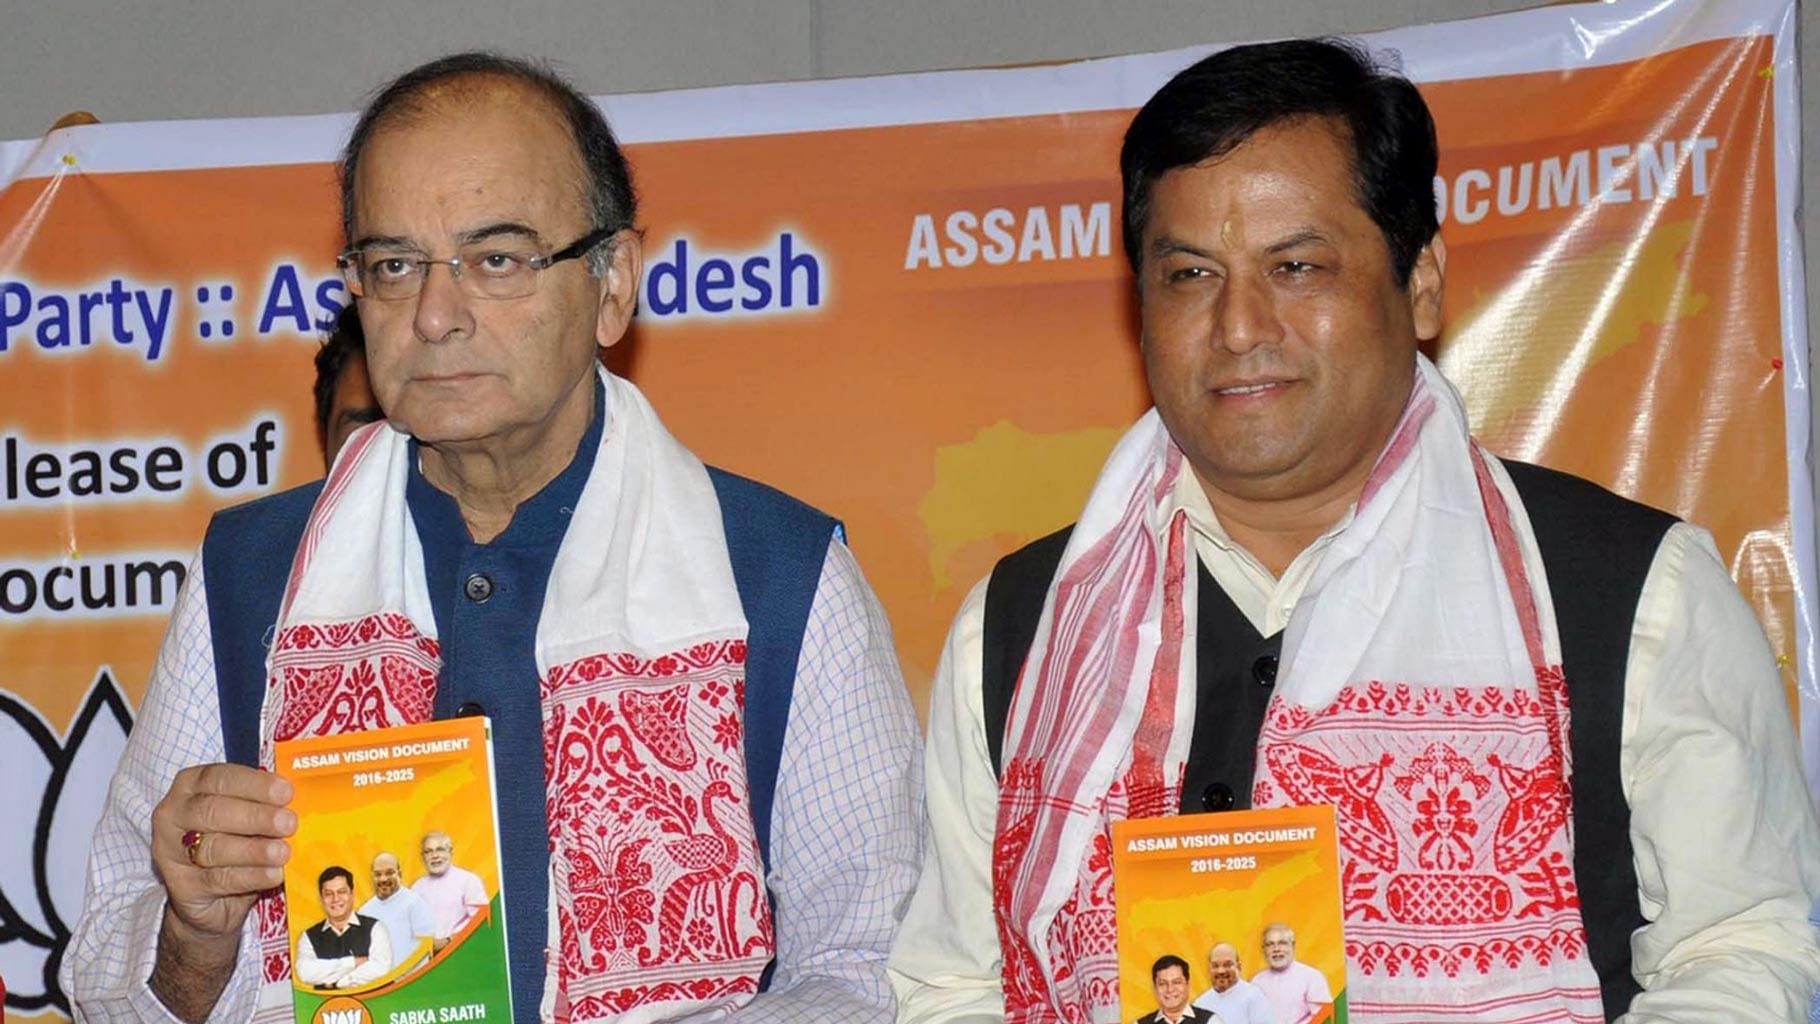 Arun Jaitley and Sarbananda Sonowal launch Assam Vision Document in Guwahati, on Friday, 25 March 2016. (Photo: IANS)